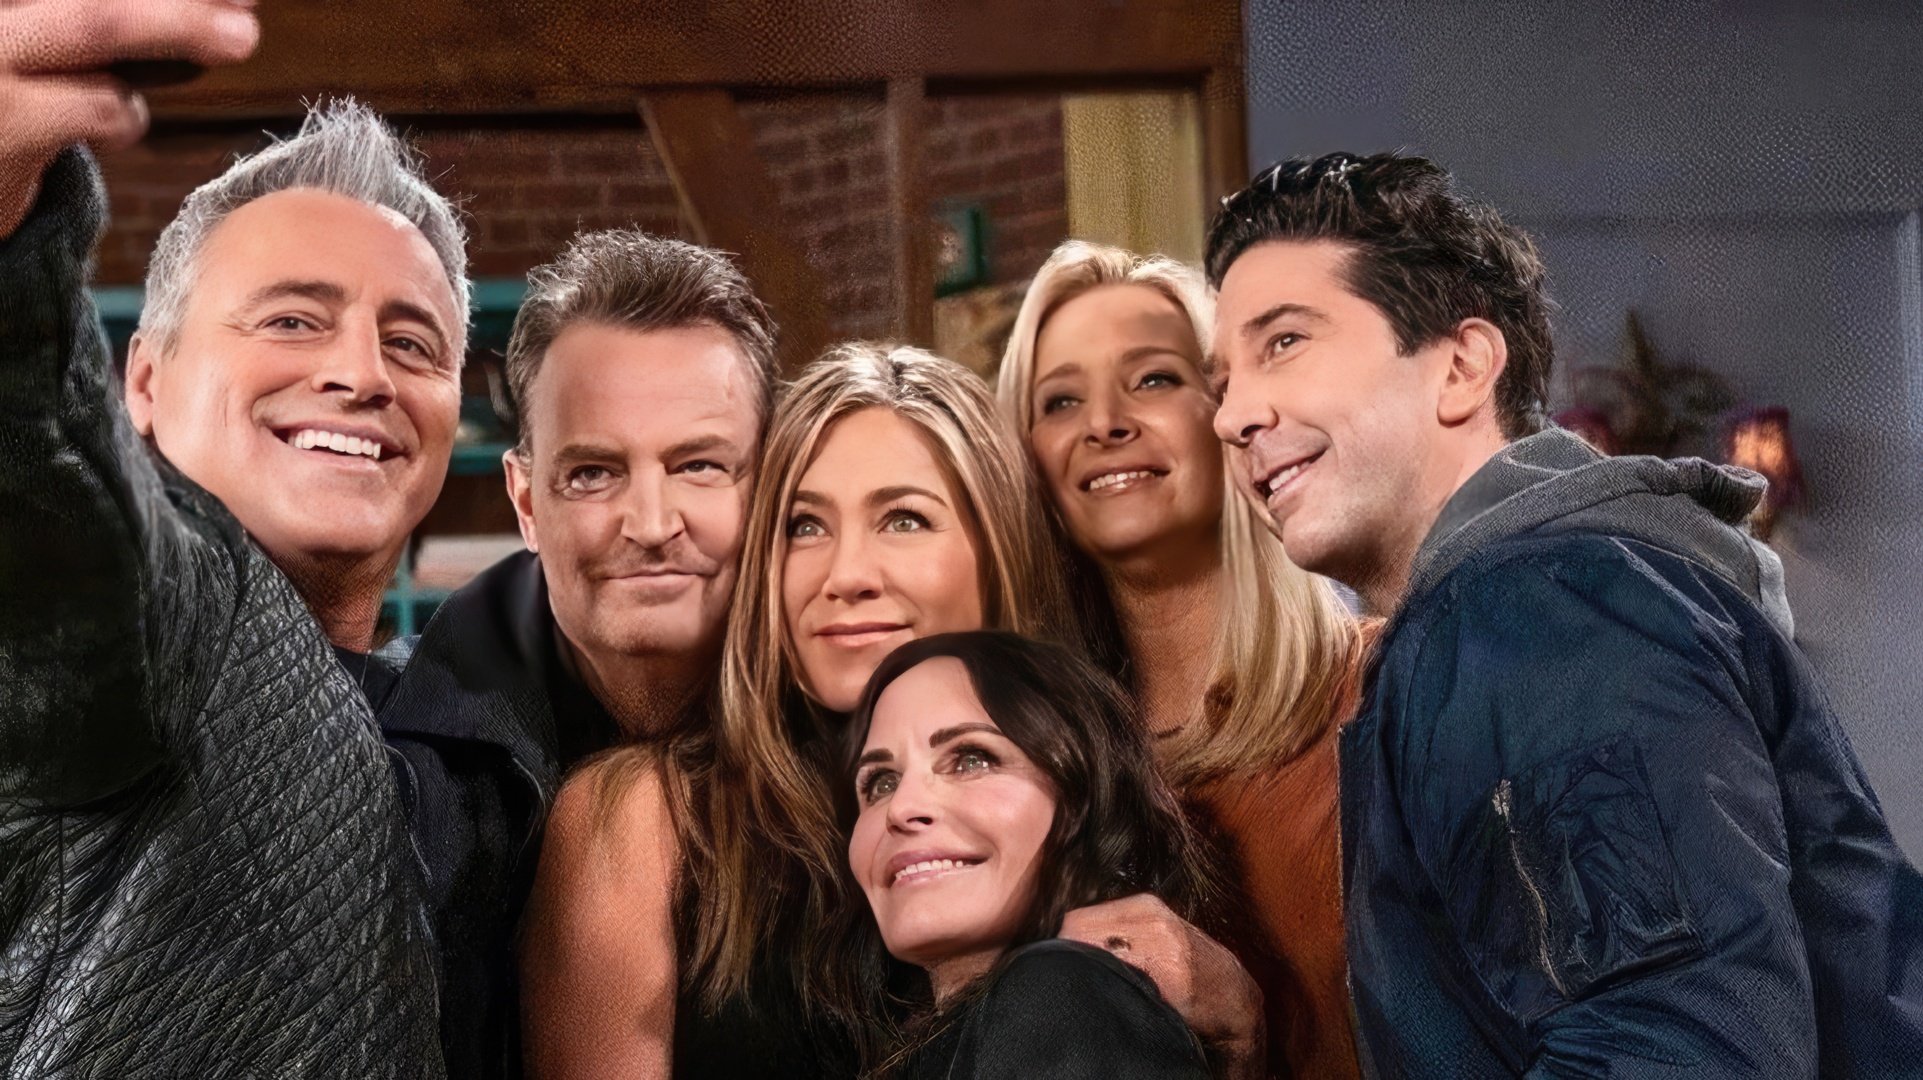 “Friends” 17 years later